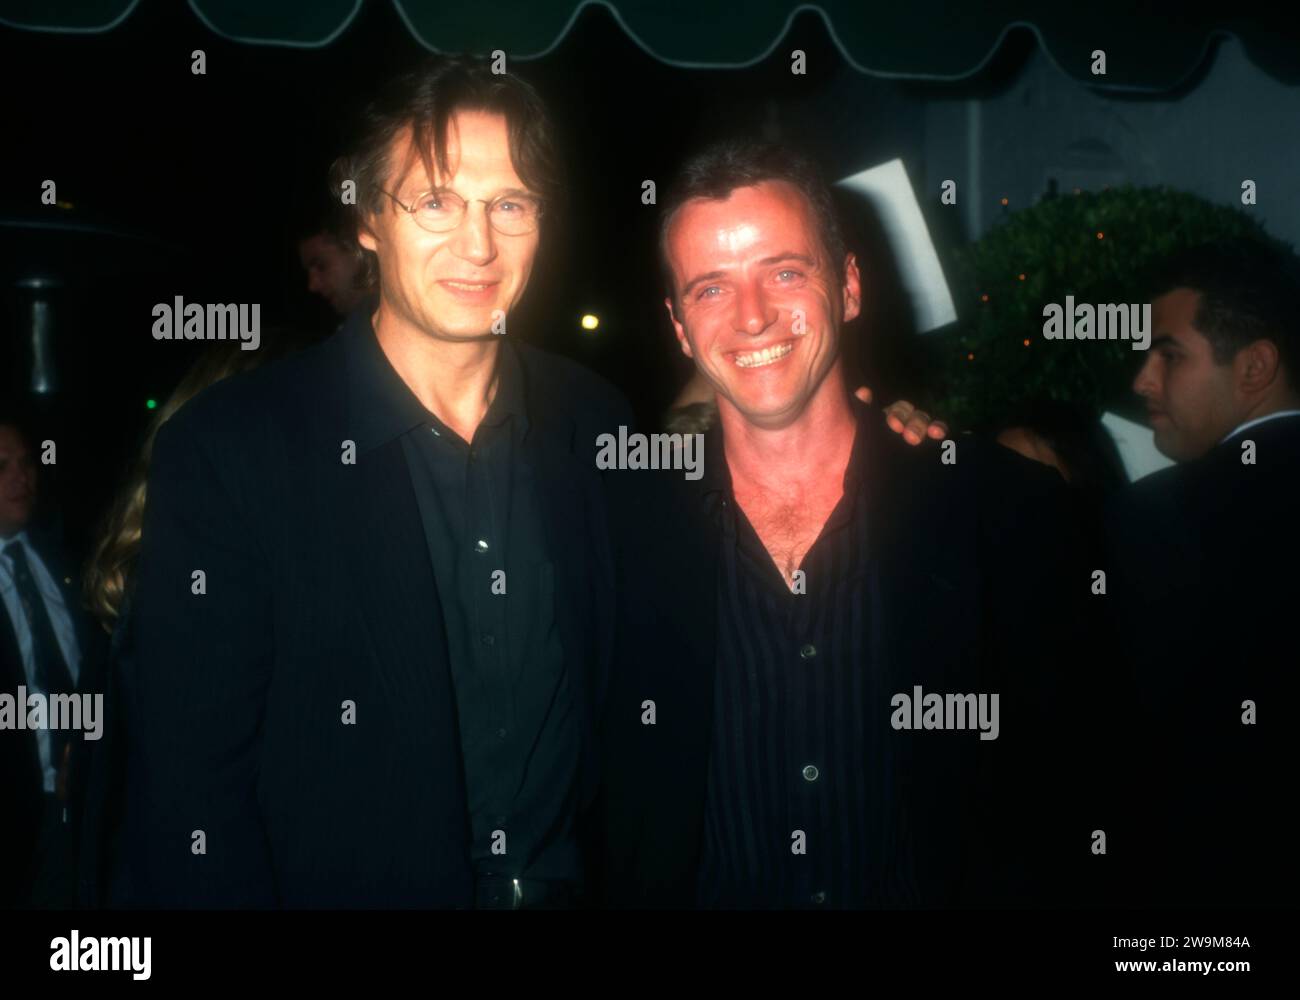 Los Angeles, California, USA 8th October 1996 Actor Liam Neeson and Actor Aidan Quinn attend Warner Bros. ÔMichael CollinsÕ Party at ChasenÕs Restaurant on October 8, 1996 in Los Angeles, California, USA. Photo by Barry King/Alamy Stock Photo Stock Photo